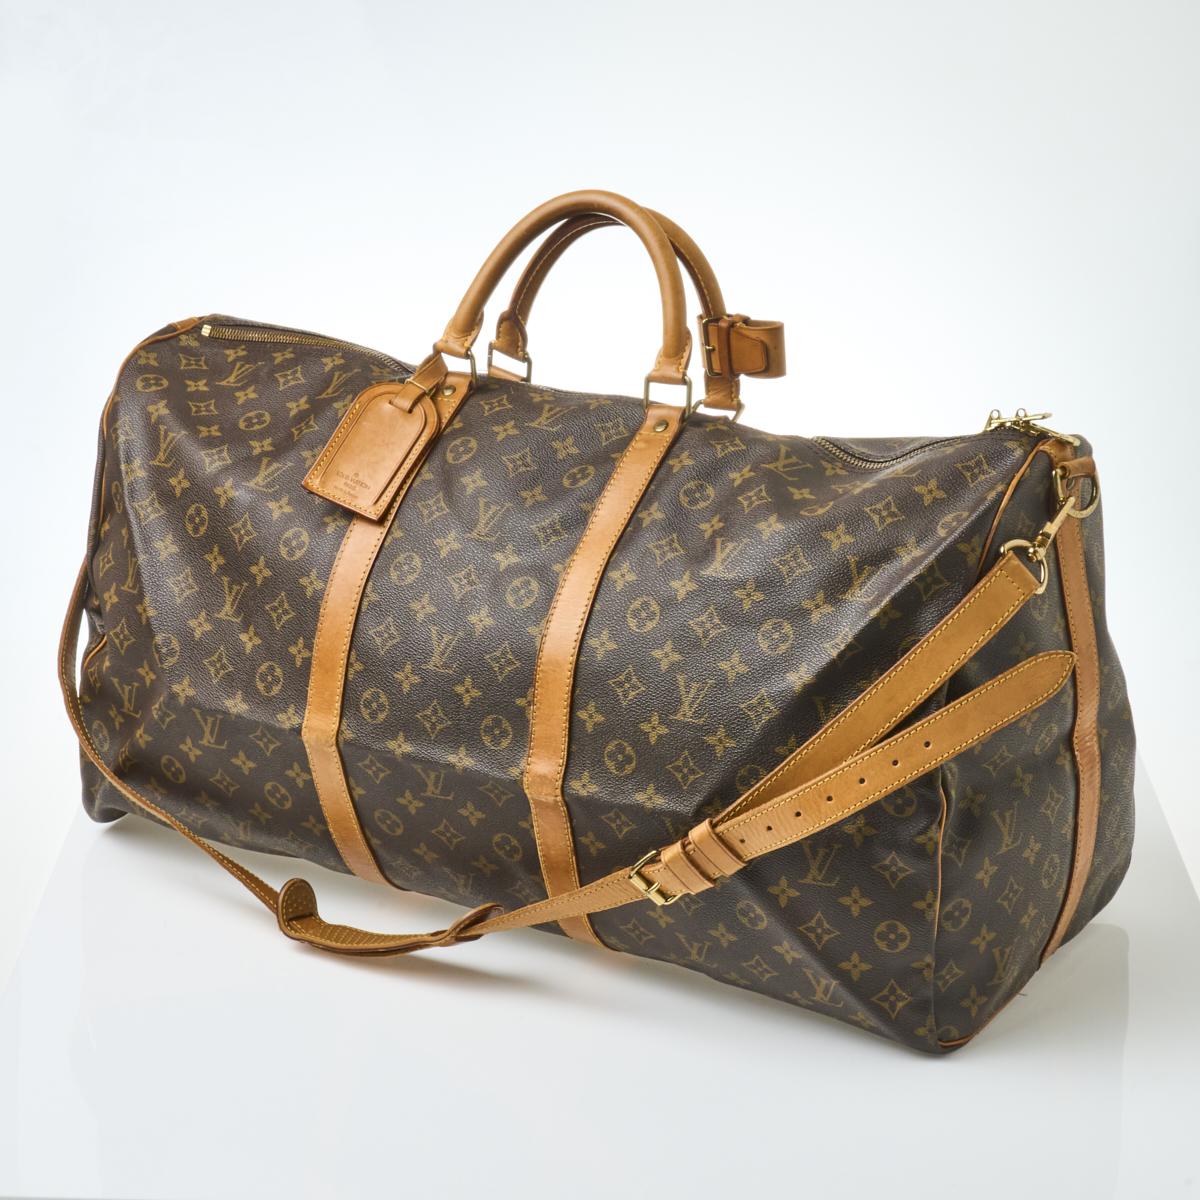 Louis Vuitton, A Louis Vuitton Keepall leather travel bag with luggage tag  width 13cm